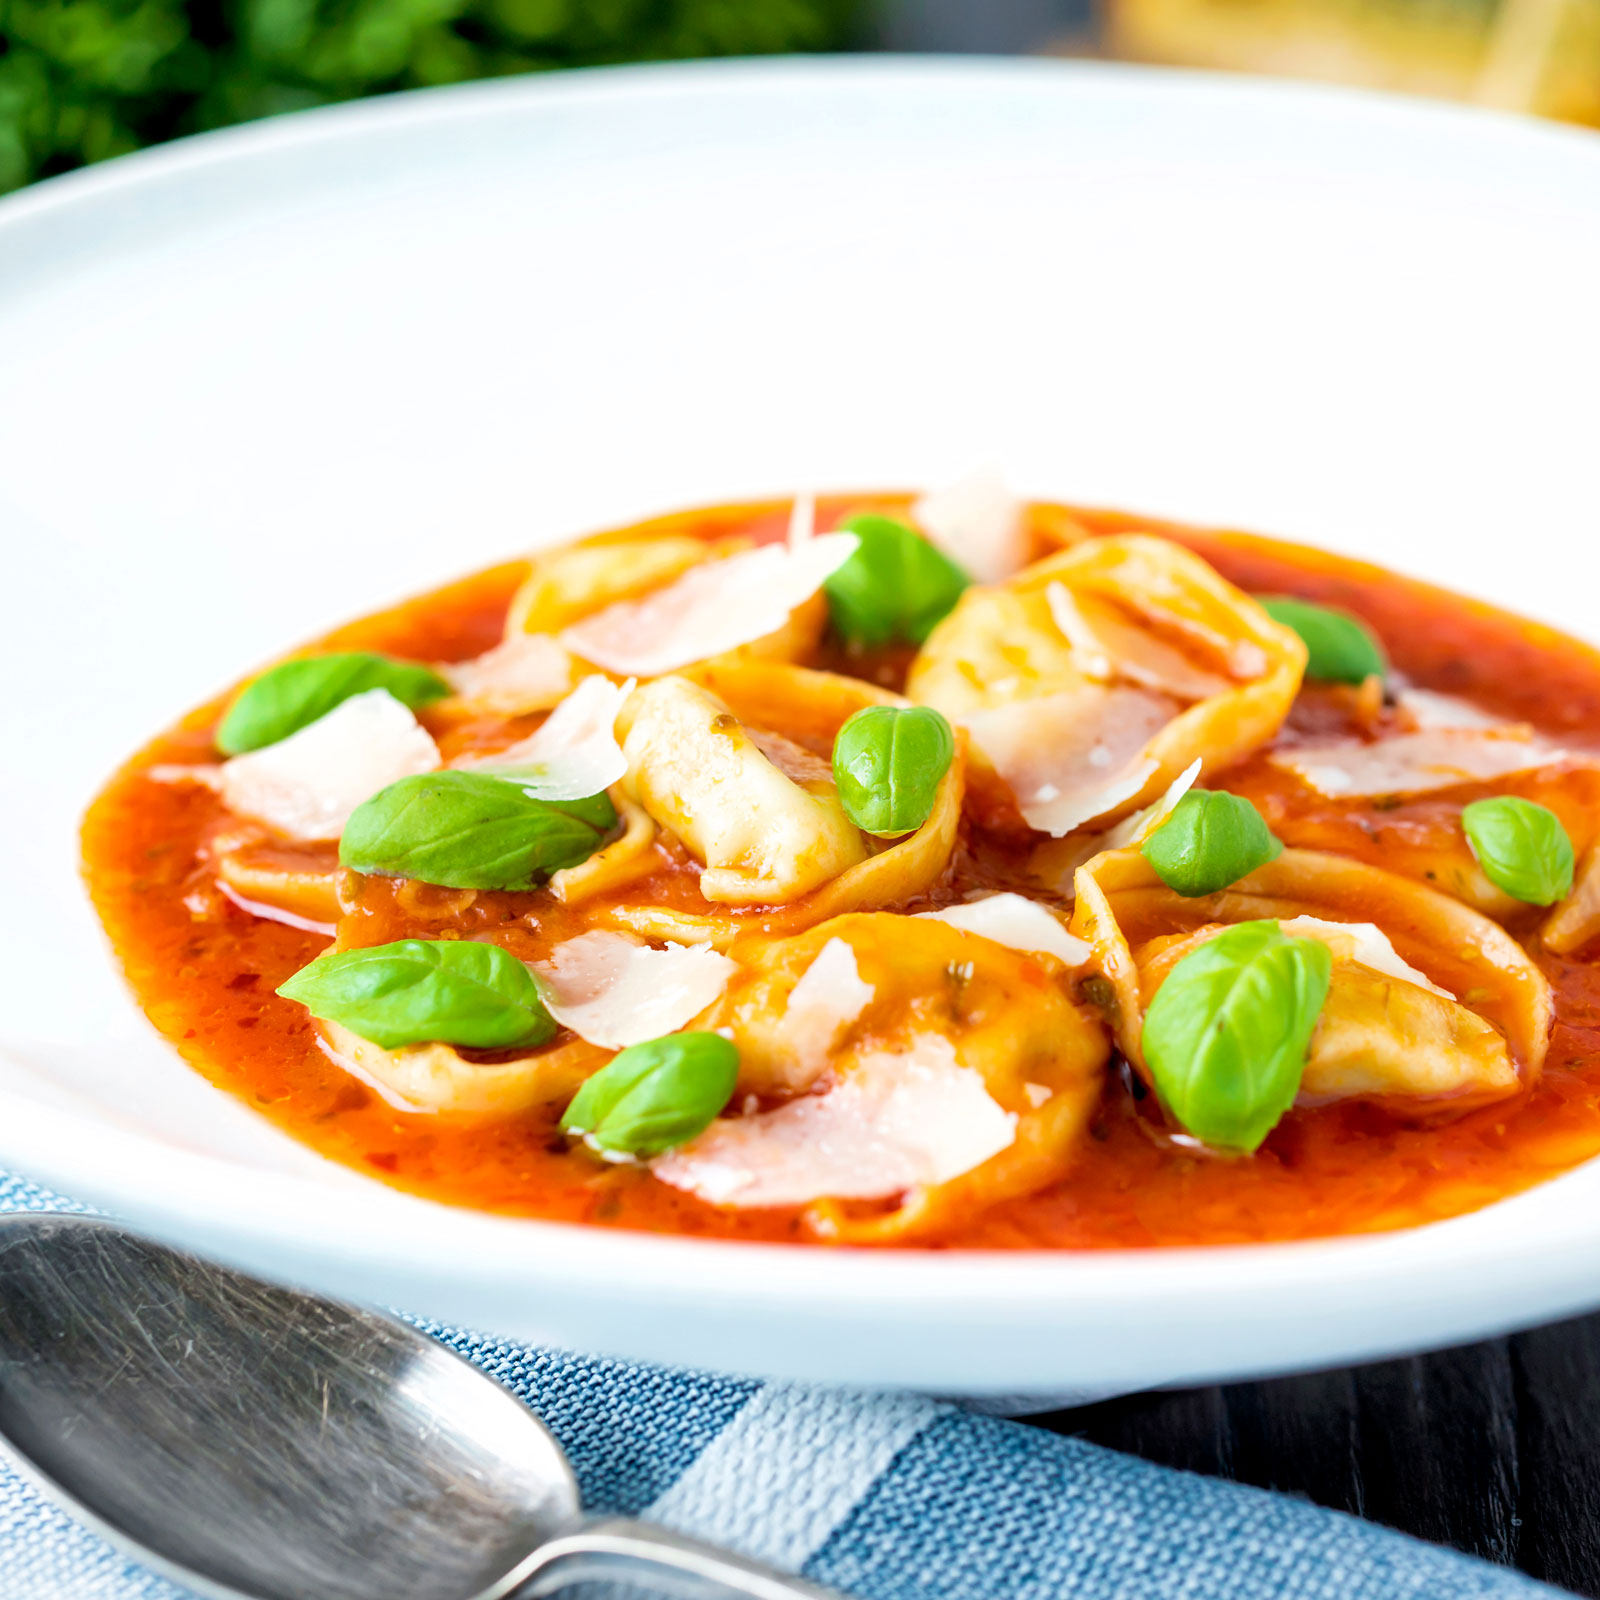 Quick and easy tortellini soup with tomato, fresh basil and parmesan shavings.